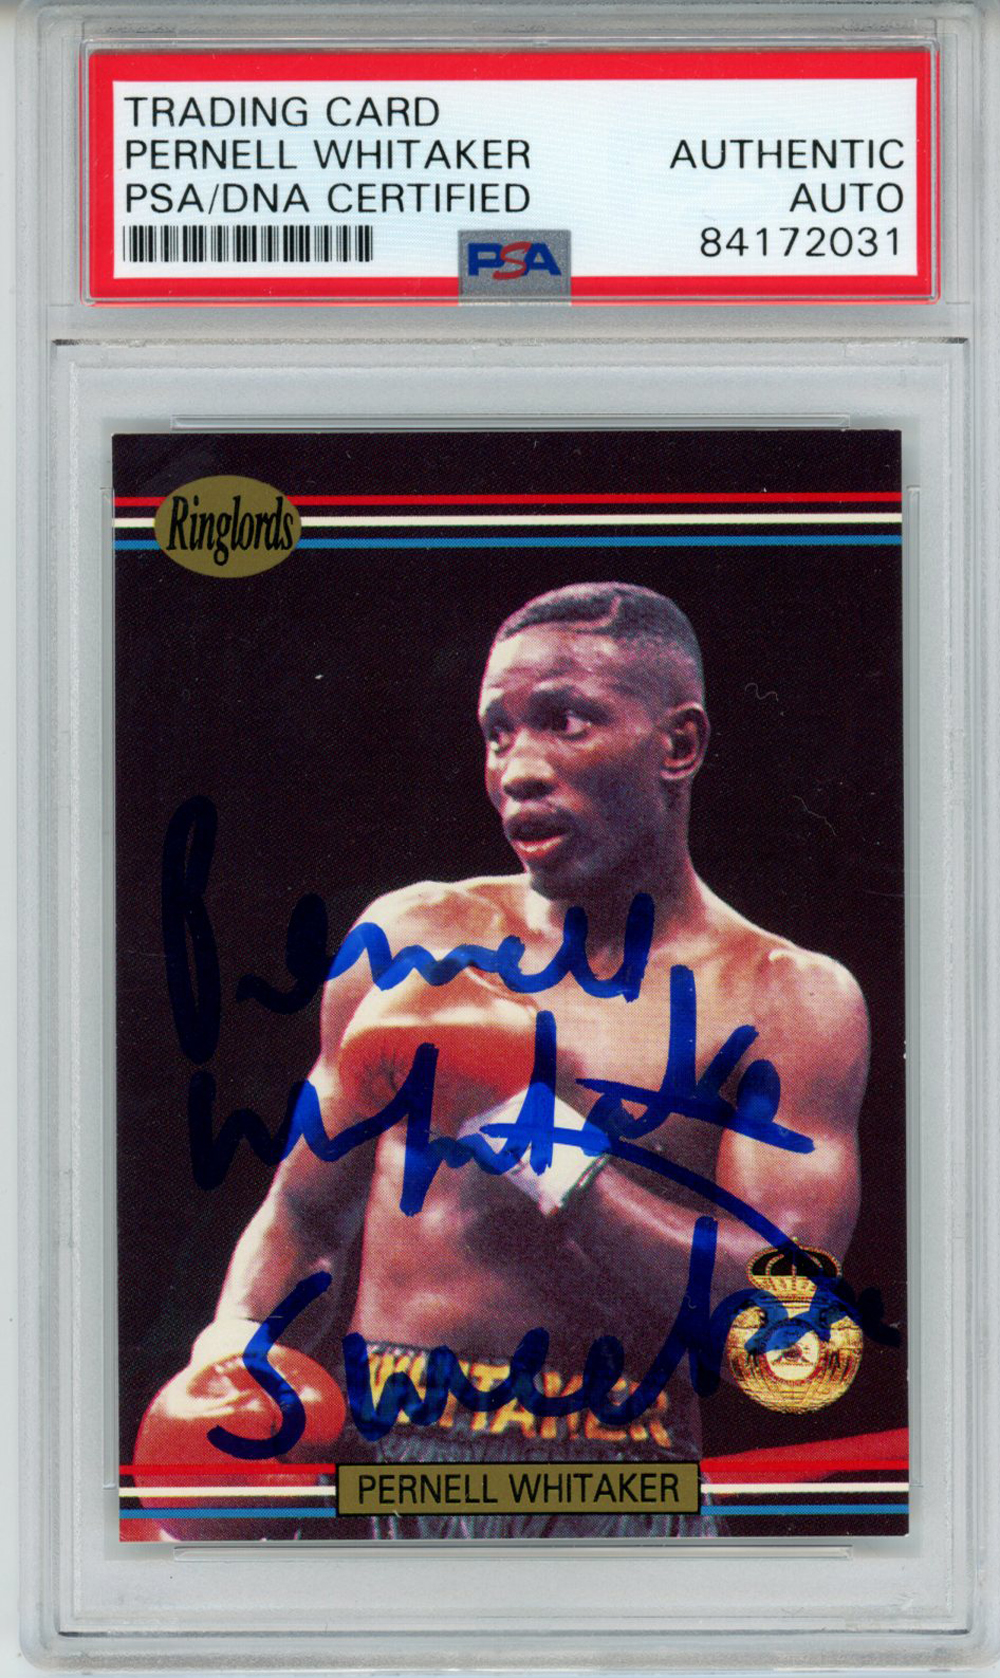 Pernell Whitaker Autographed 1991 Ringlords #34 Trading Card PSA Slab 32625